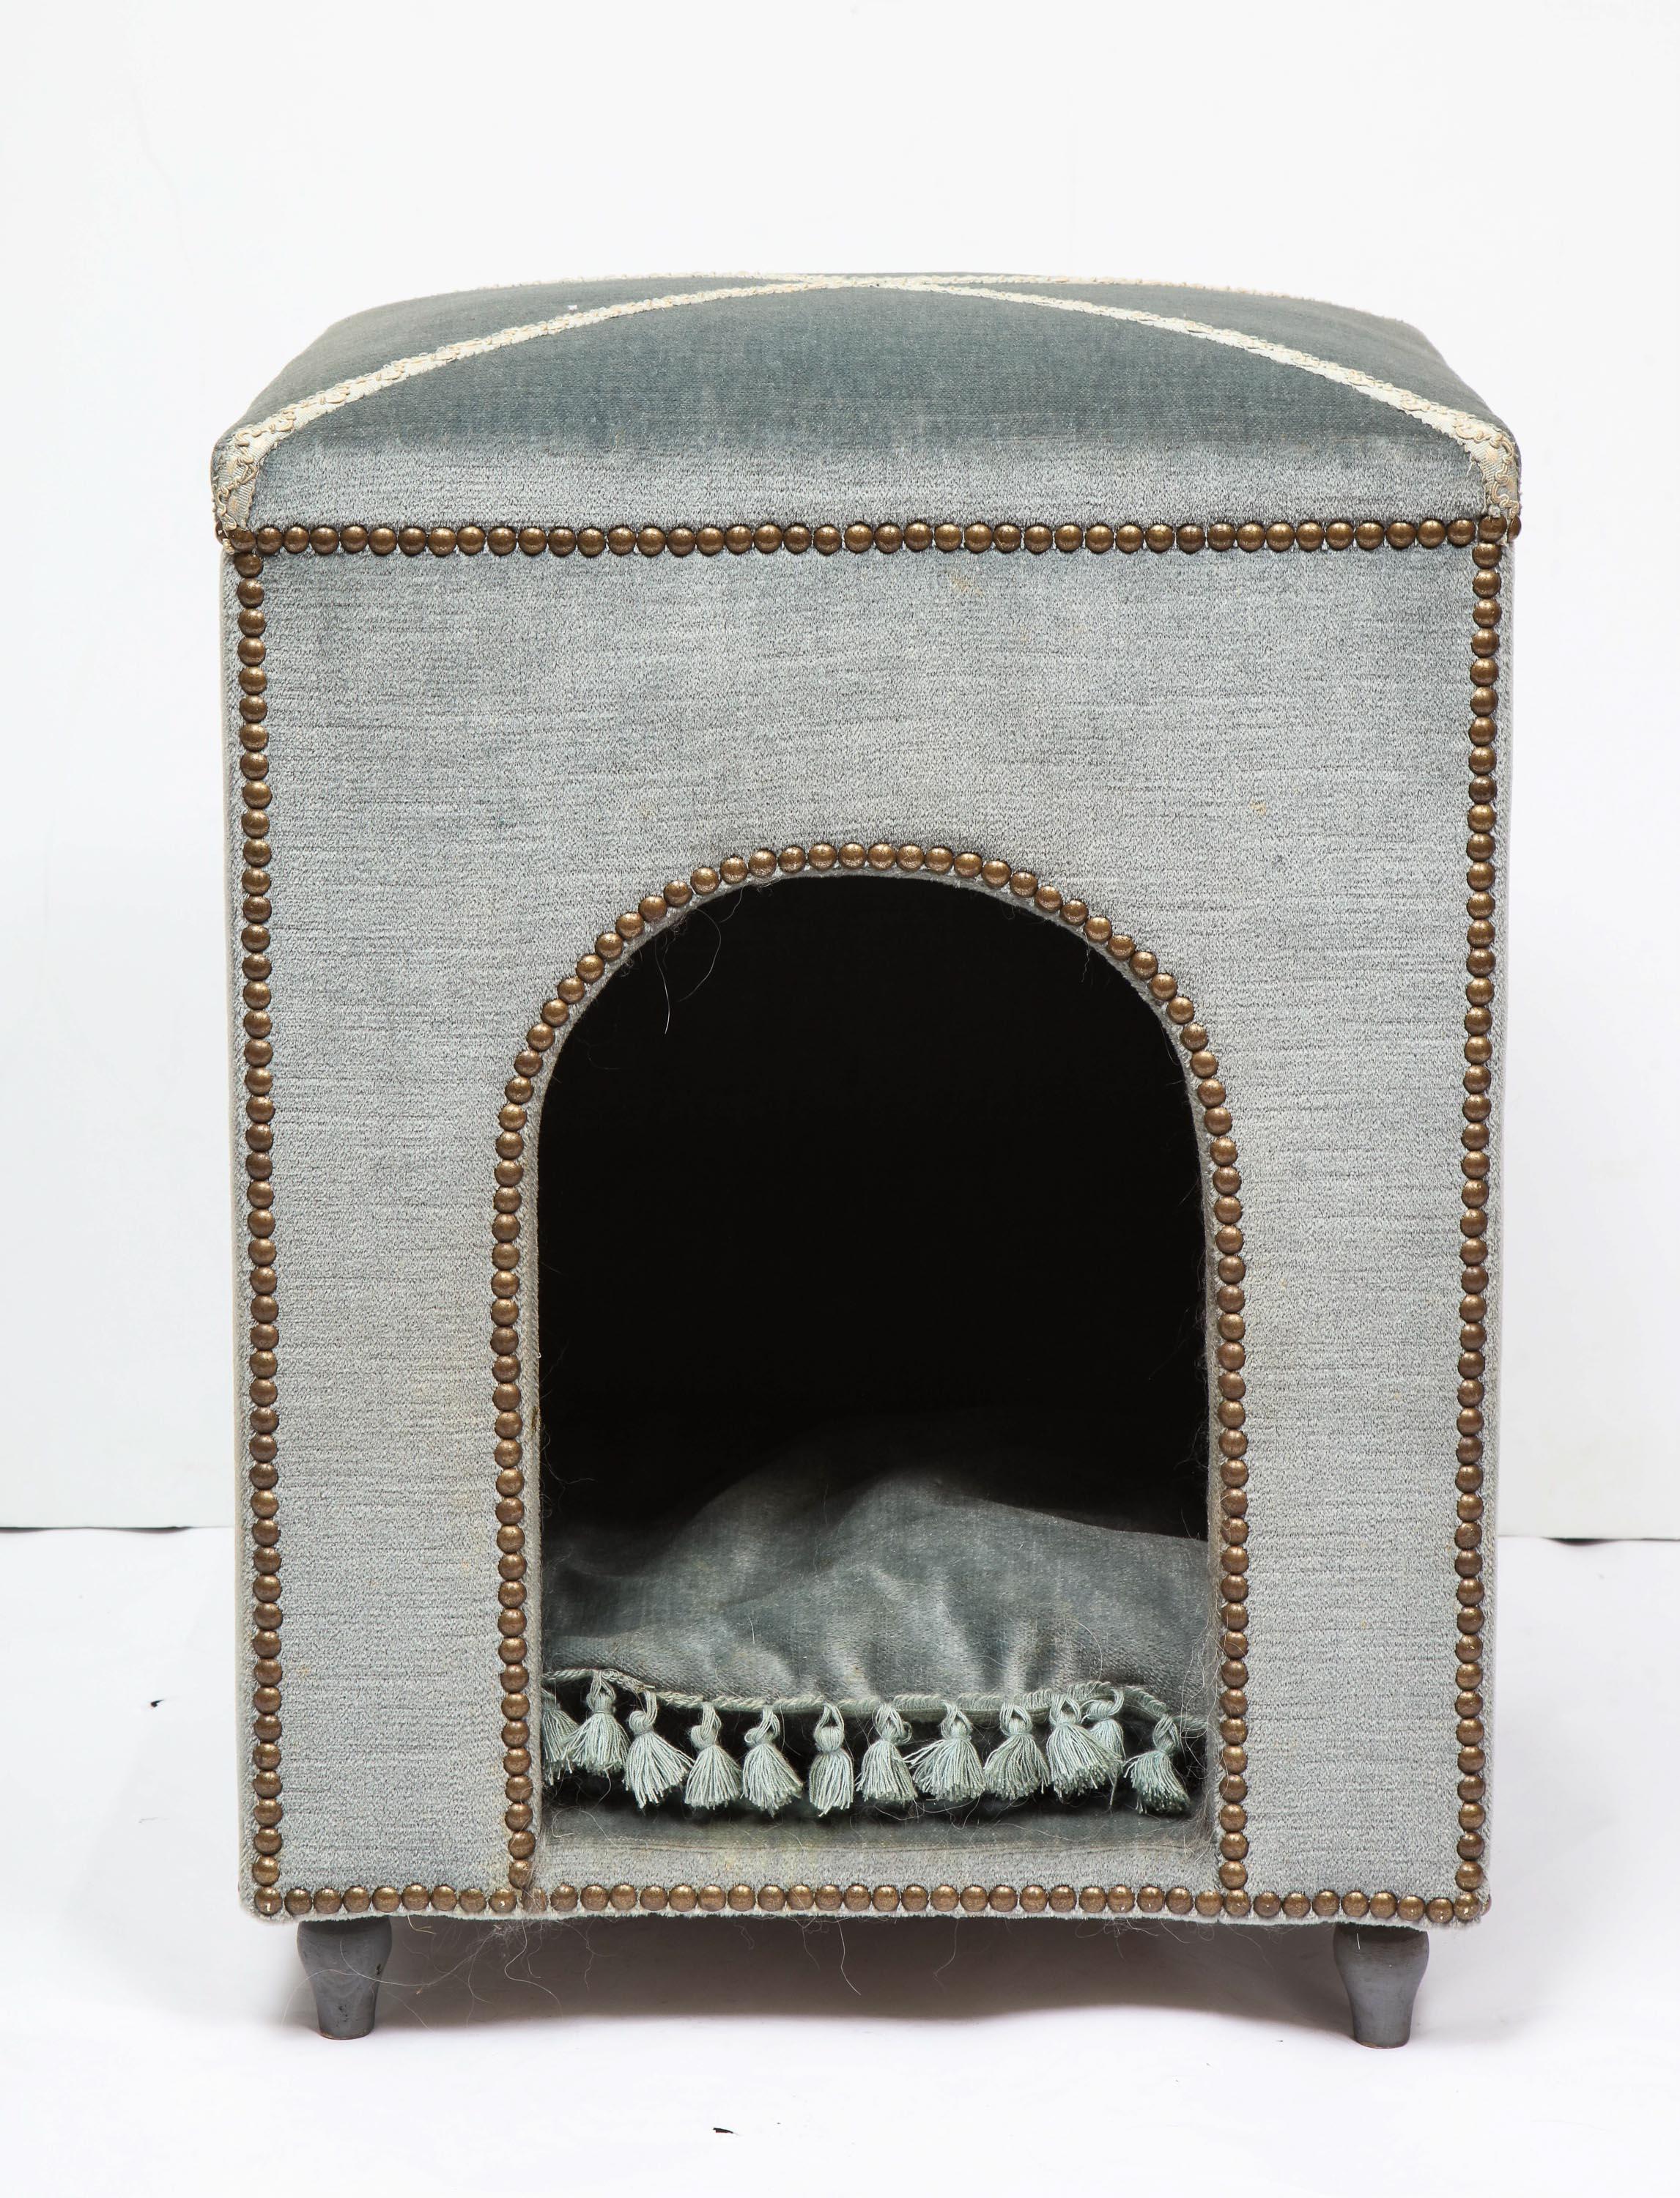 Exquisite French Louis XVI style velvet-upholstered Niche de Chien (Dog Bed),

Marie Antoinette had a nearly similar one for her dog as well....

Very good condition, ready to use.

Measures: 25